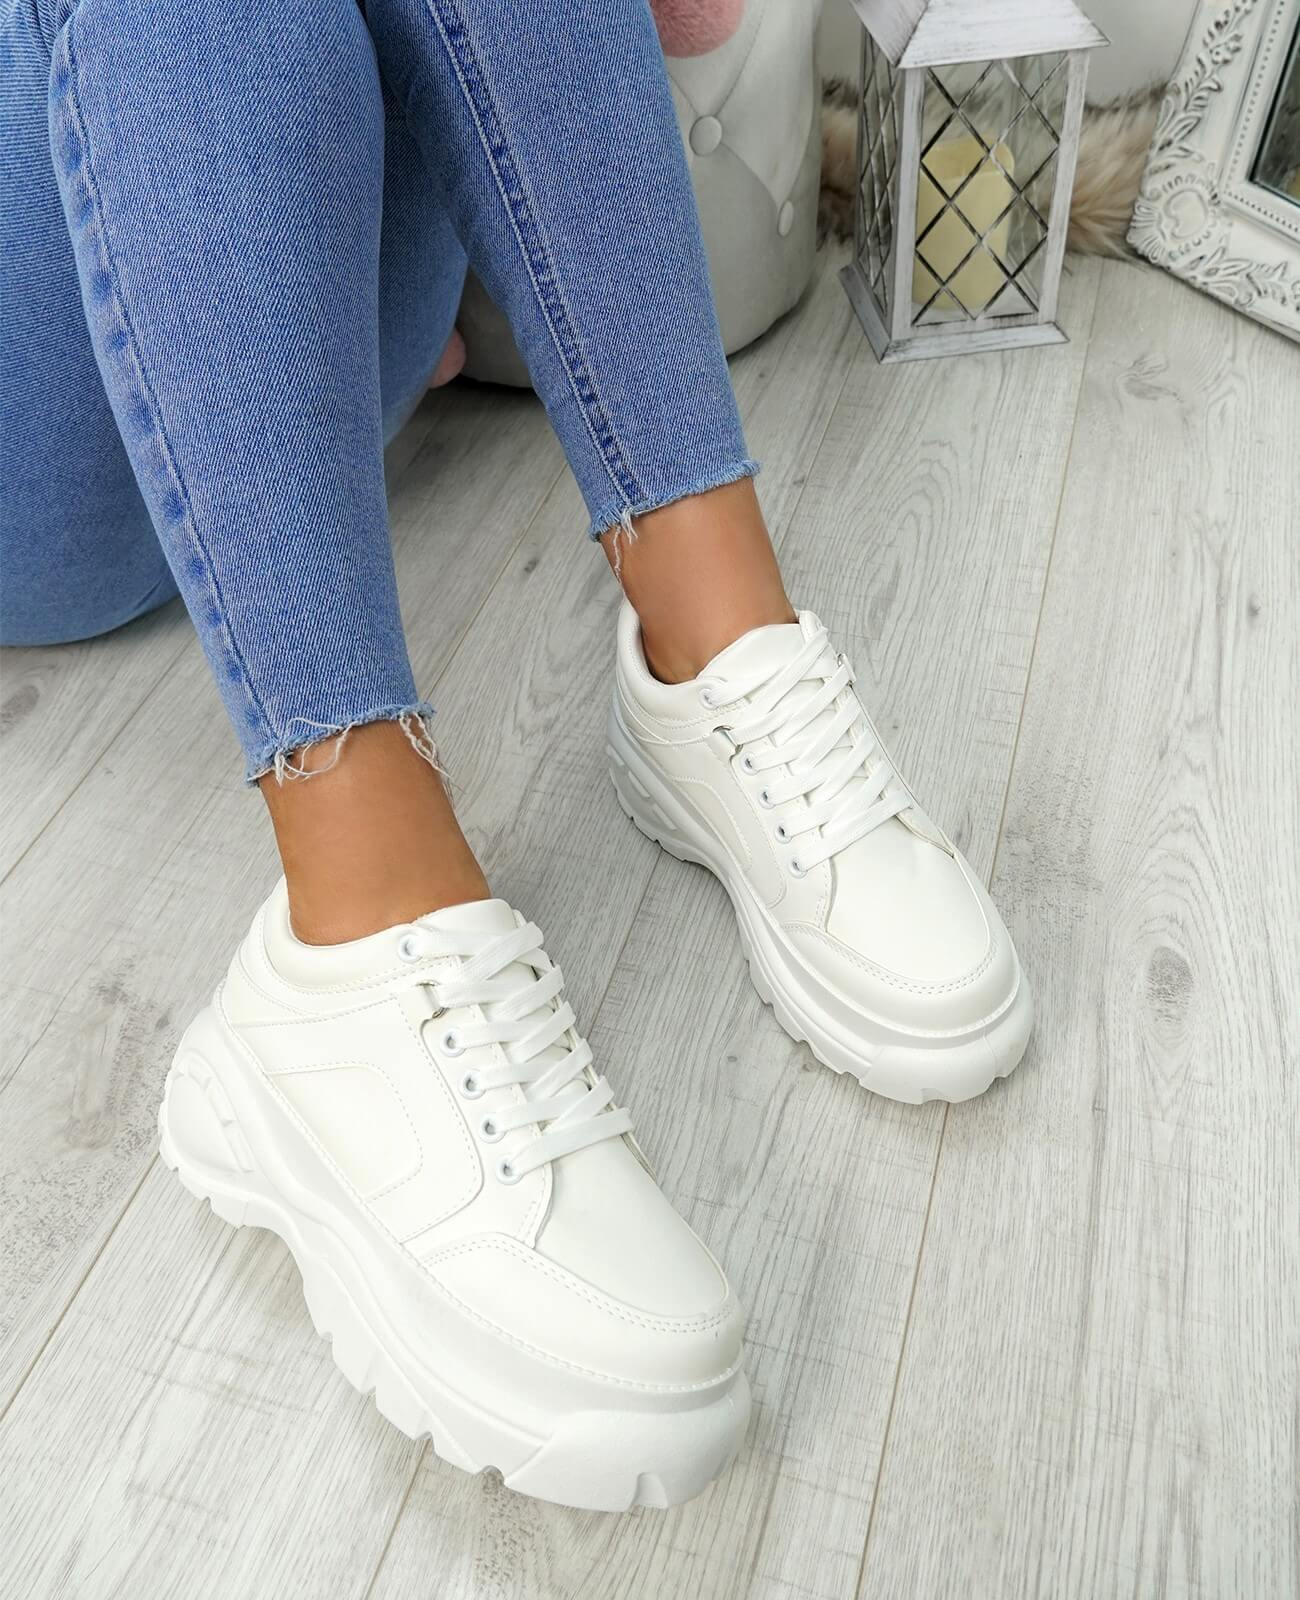 WOMENS LADIES CHUNKY TRAINERS LACE UP PLIMSOLLS SNEAKERS PARTY SHOES ...